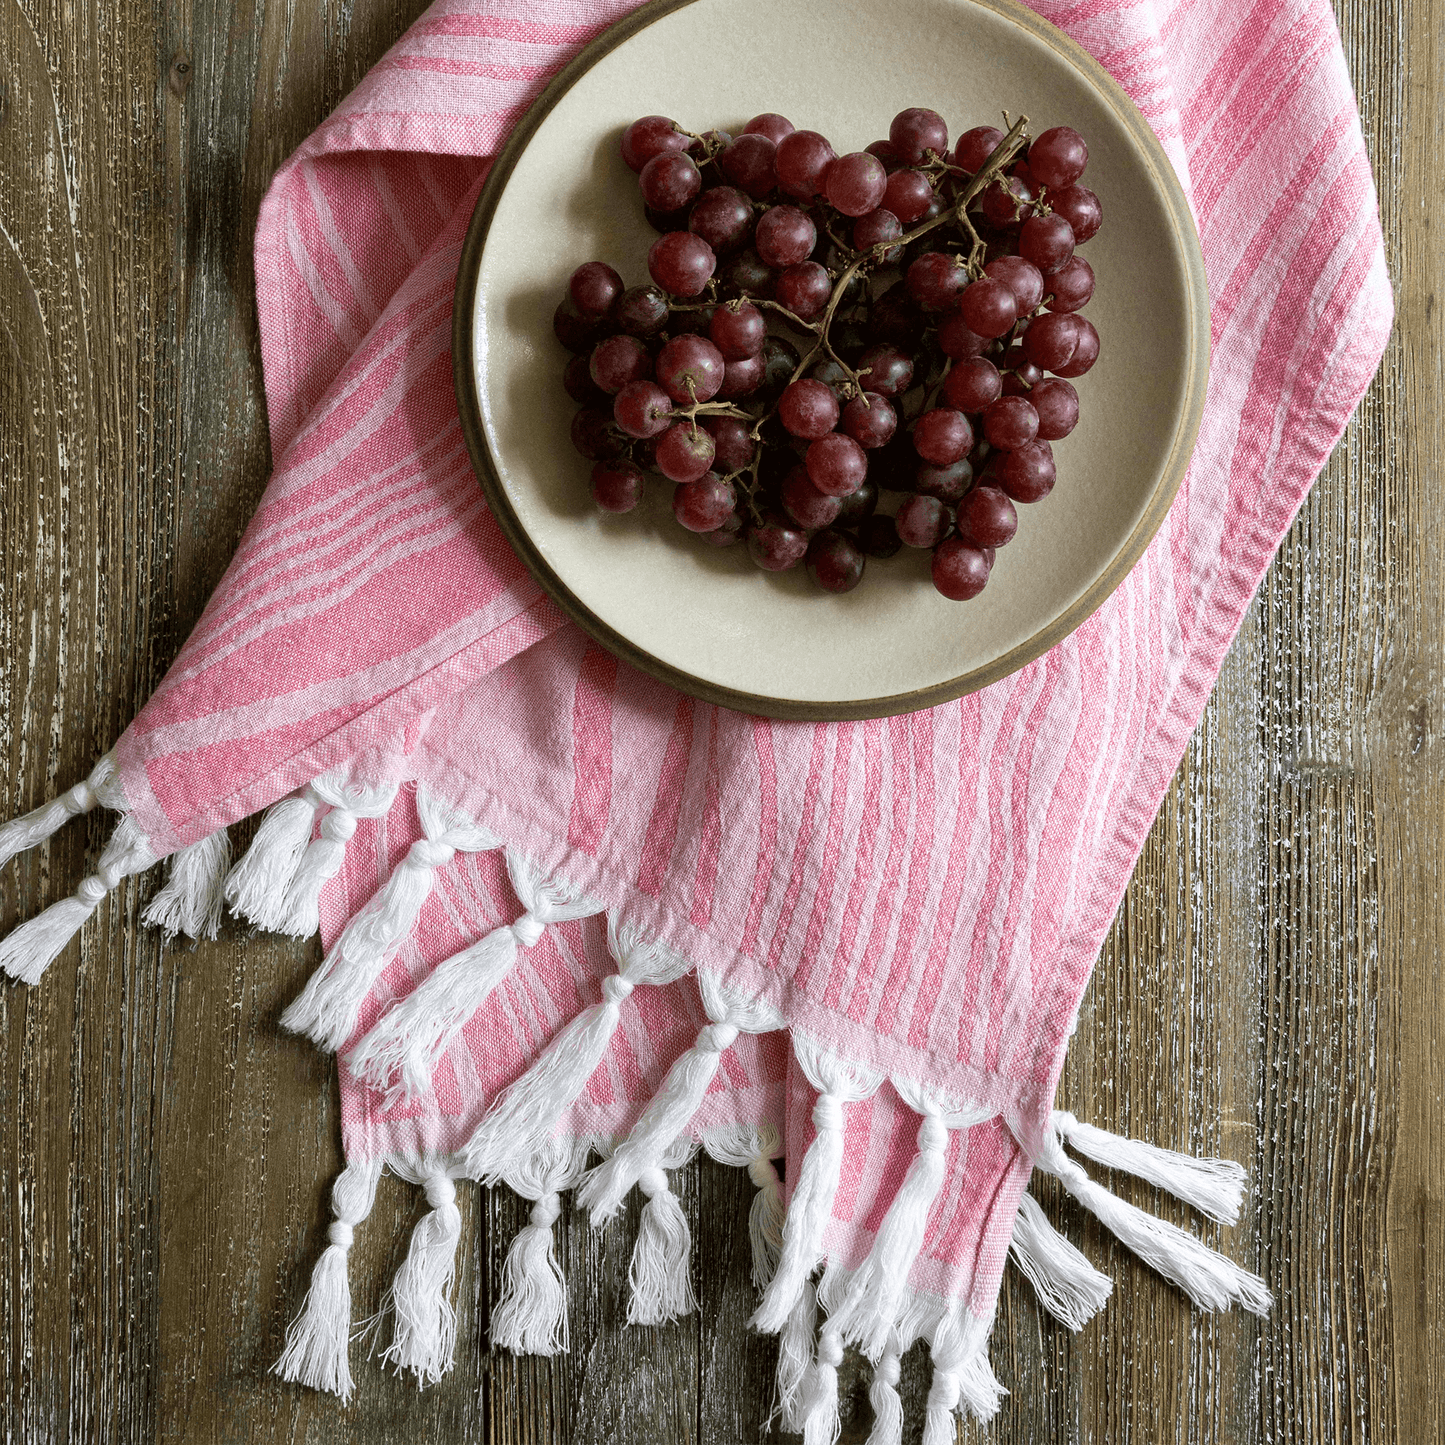 Pink Turkish hand towel with grapes